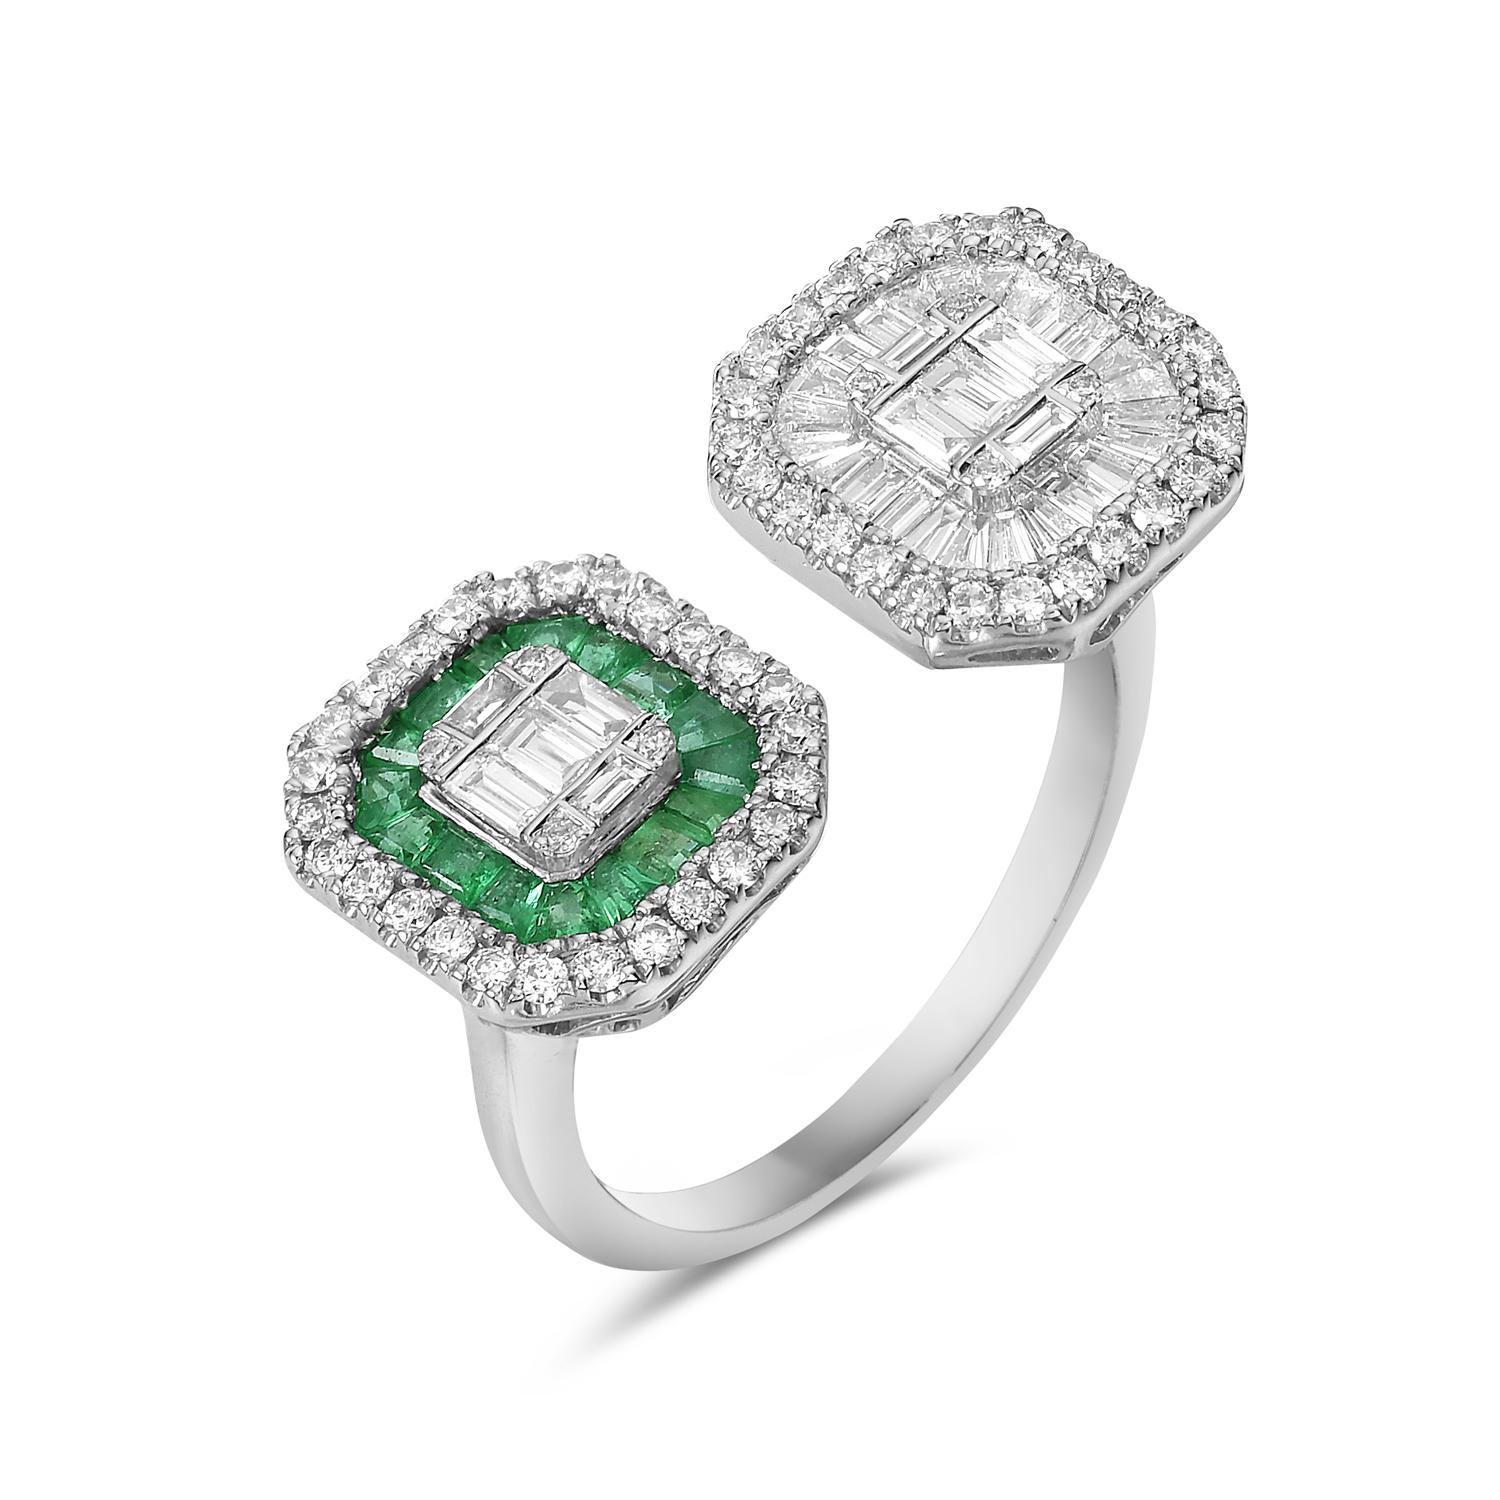 Artisan Between The Finger Ring With Emerald & Diamonds Made In 18k White Gold For Sale